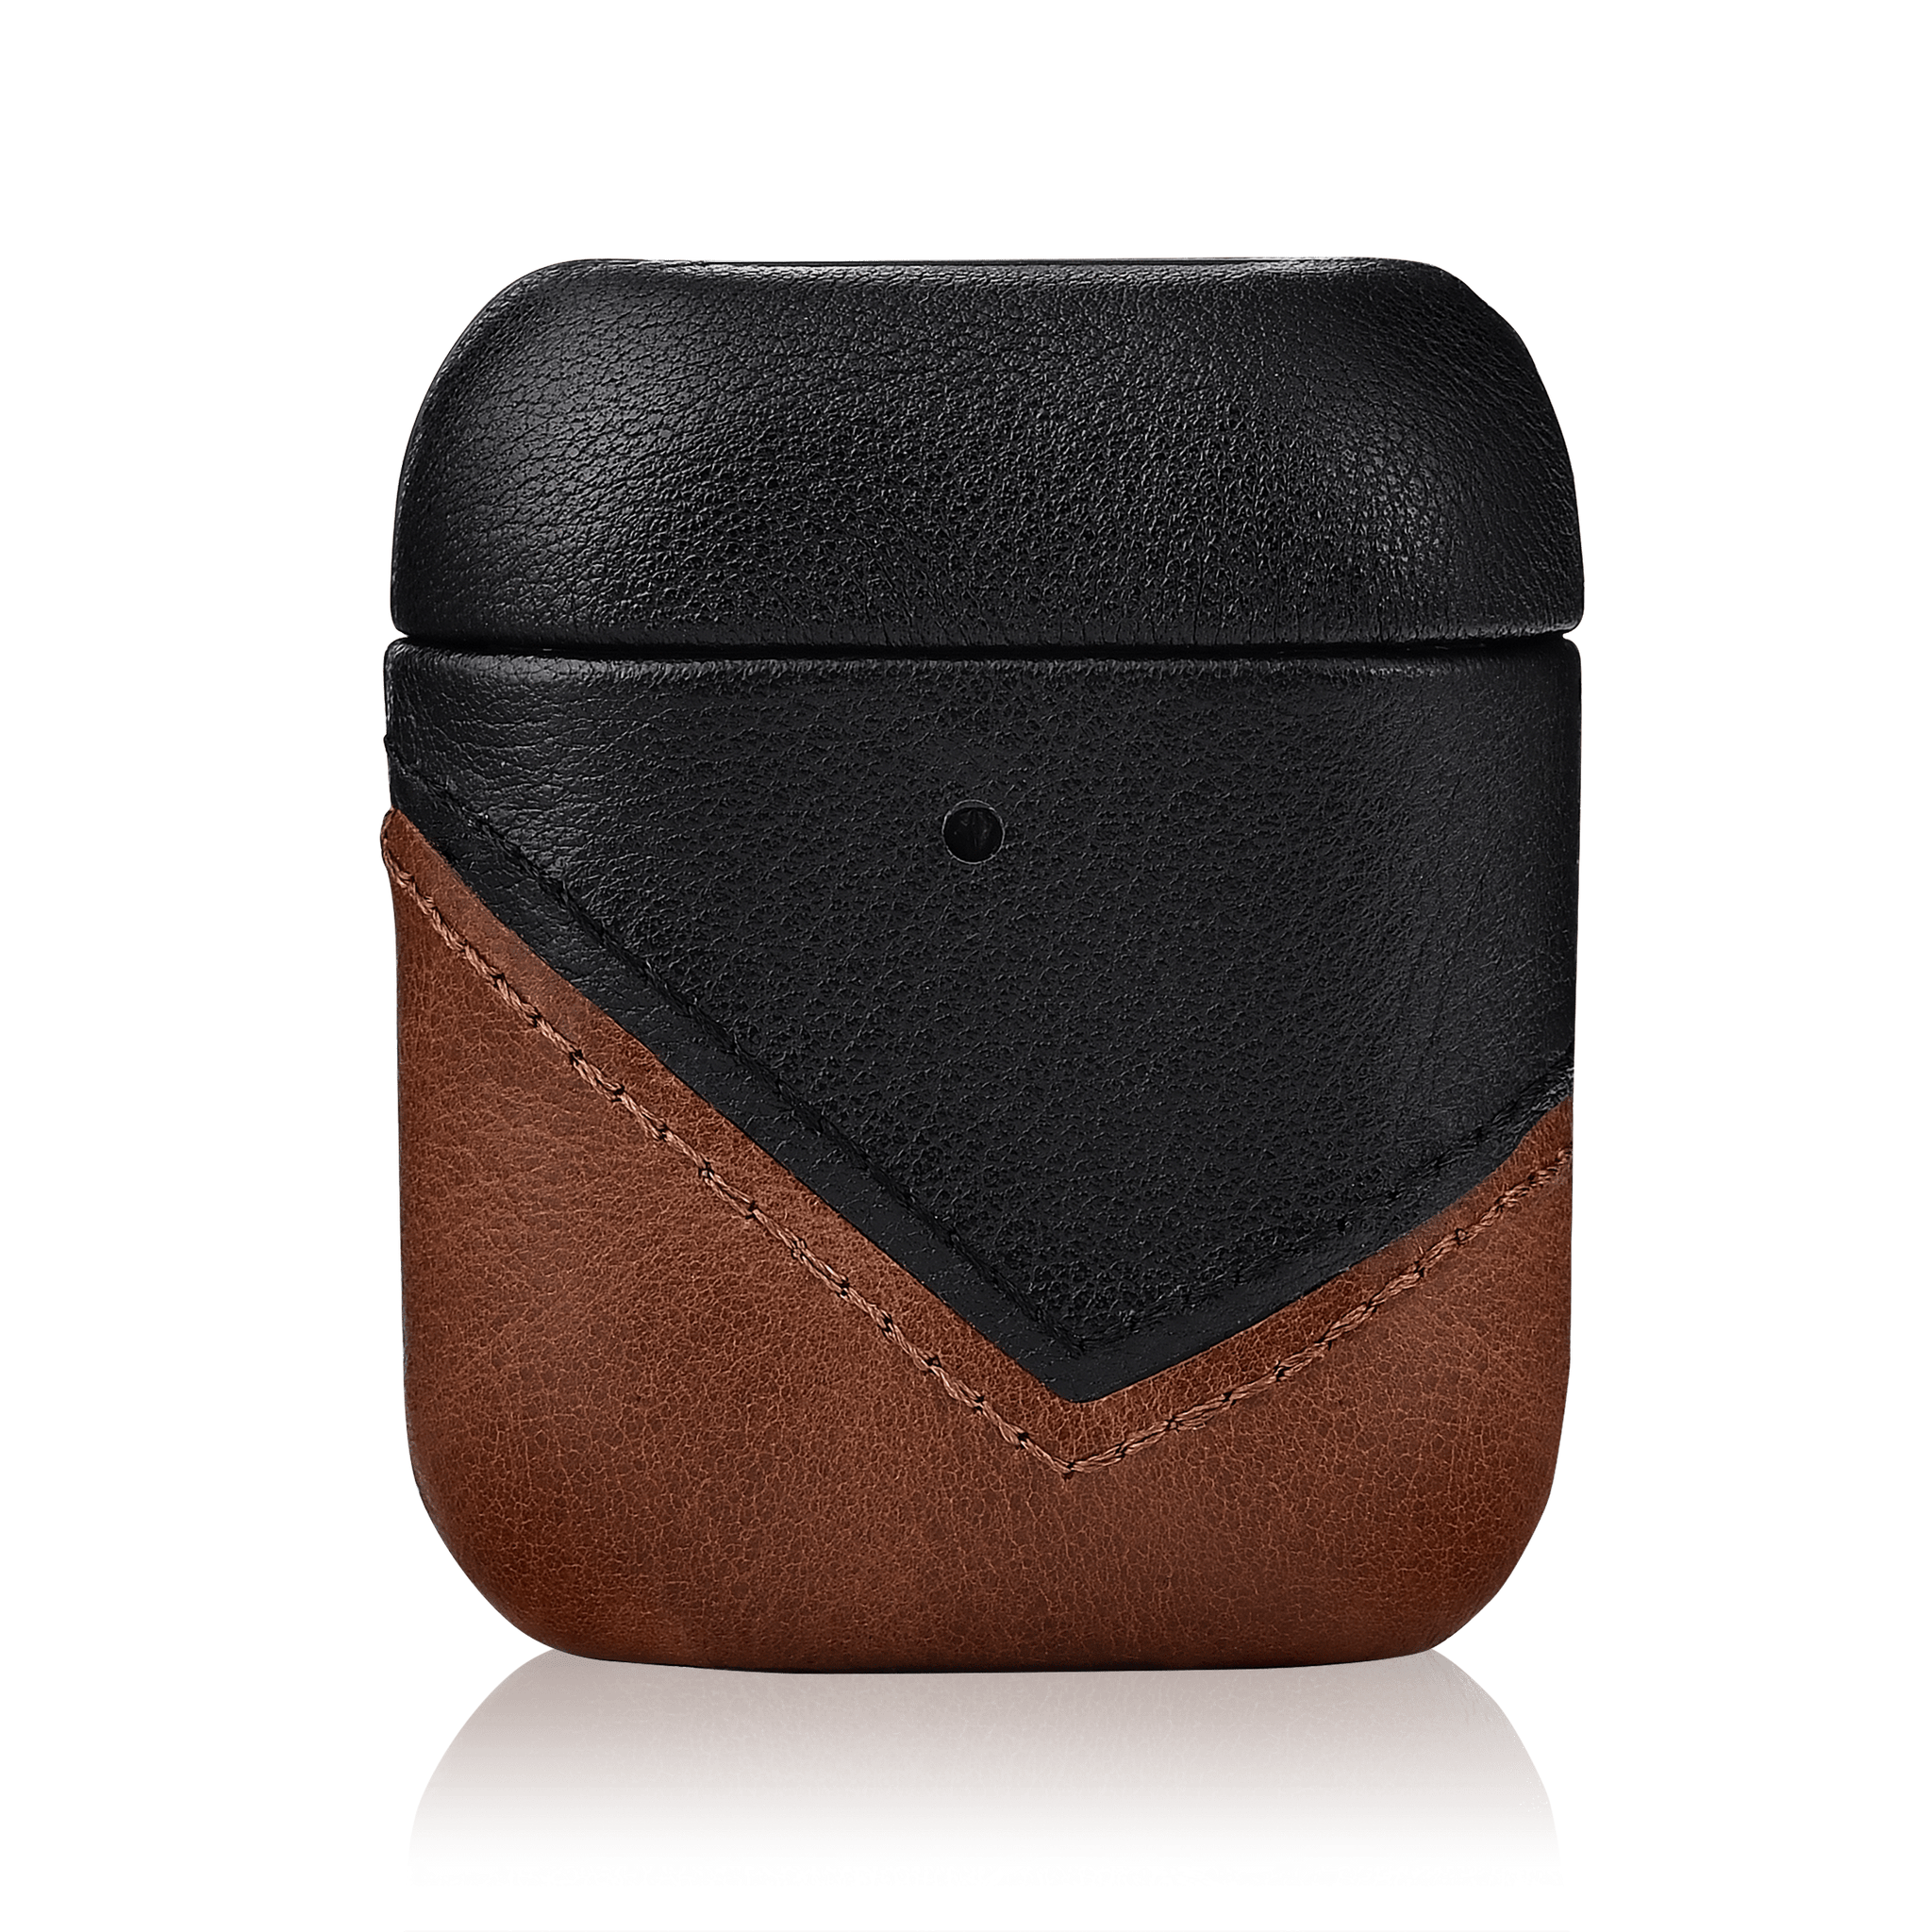 Leather AirPods Cases - TERRA by Bullstrap